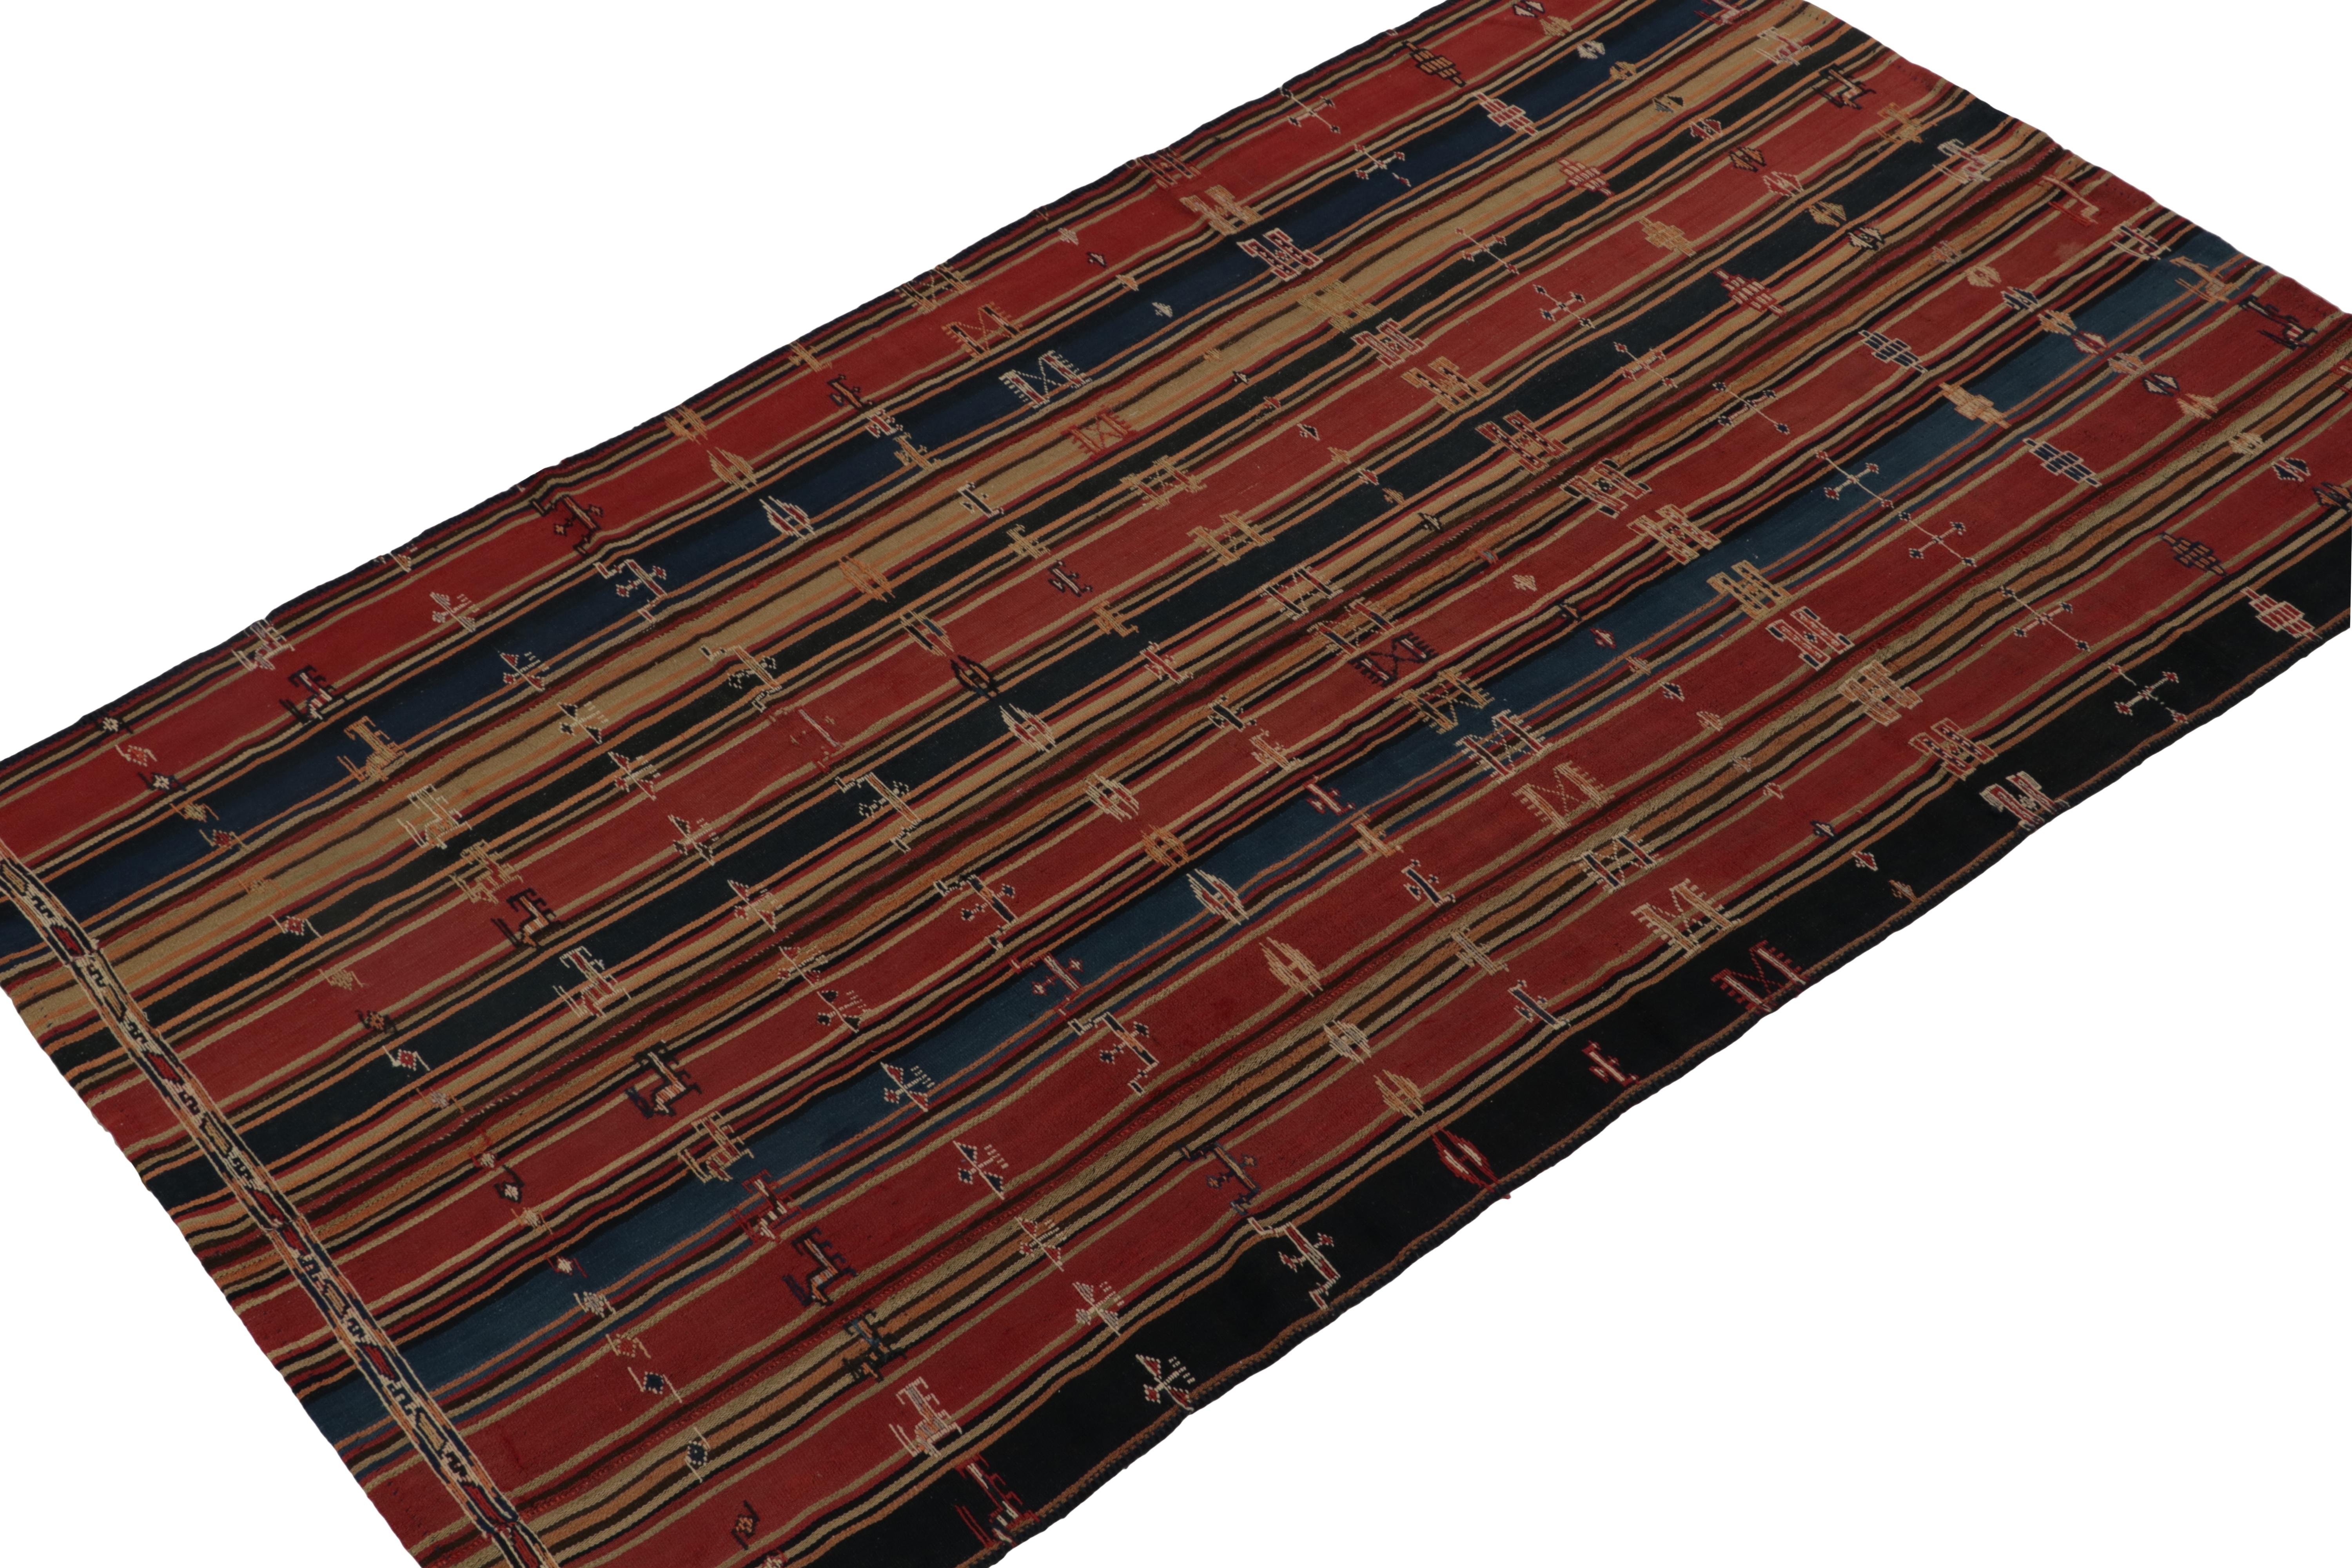 This vintage 5x8 Persian kilim is a Jajim style curation, handwoven in wool circa 1950-1960. 

Further on the Design:

This rich repeat design prefers brick red, navy blue, rust, and beige-brown in a gorgeous yet simple play of polychromatic